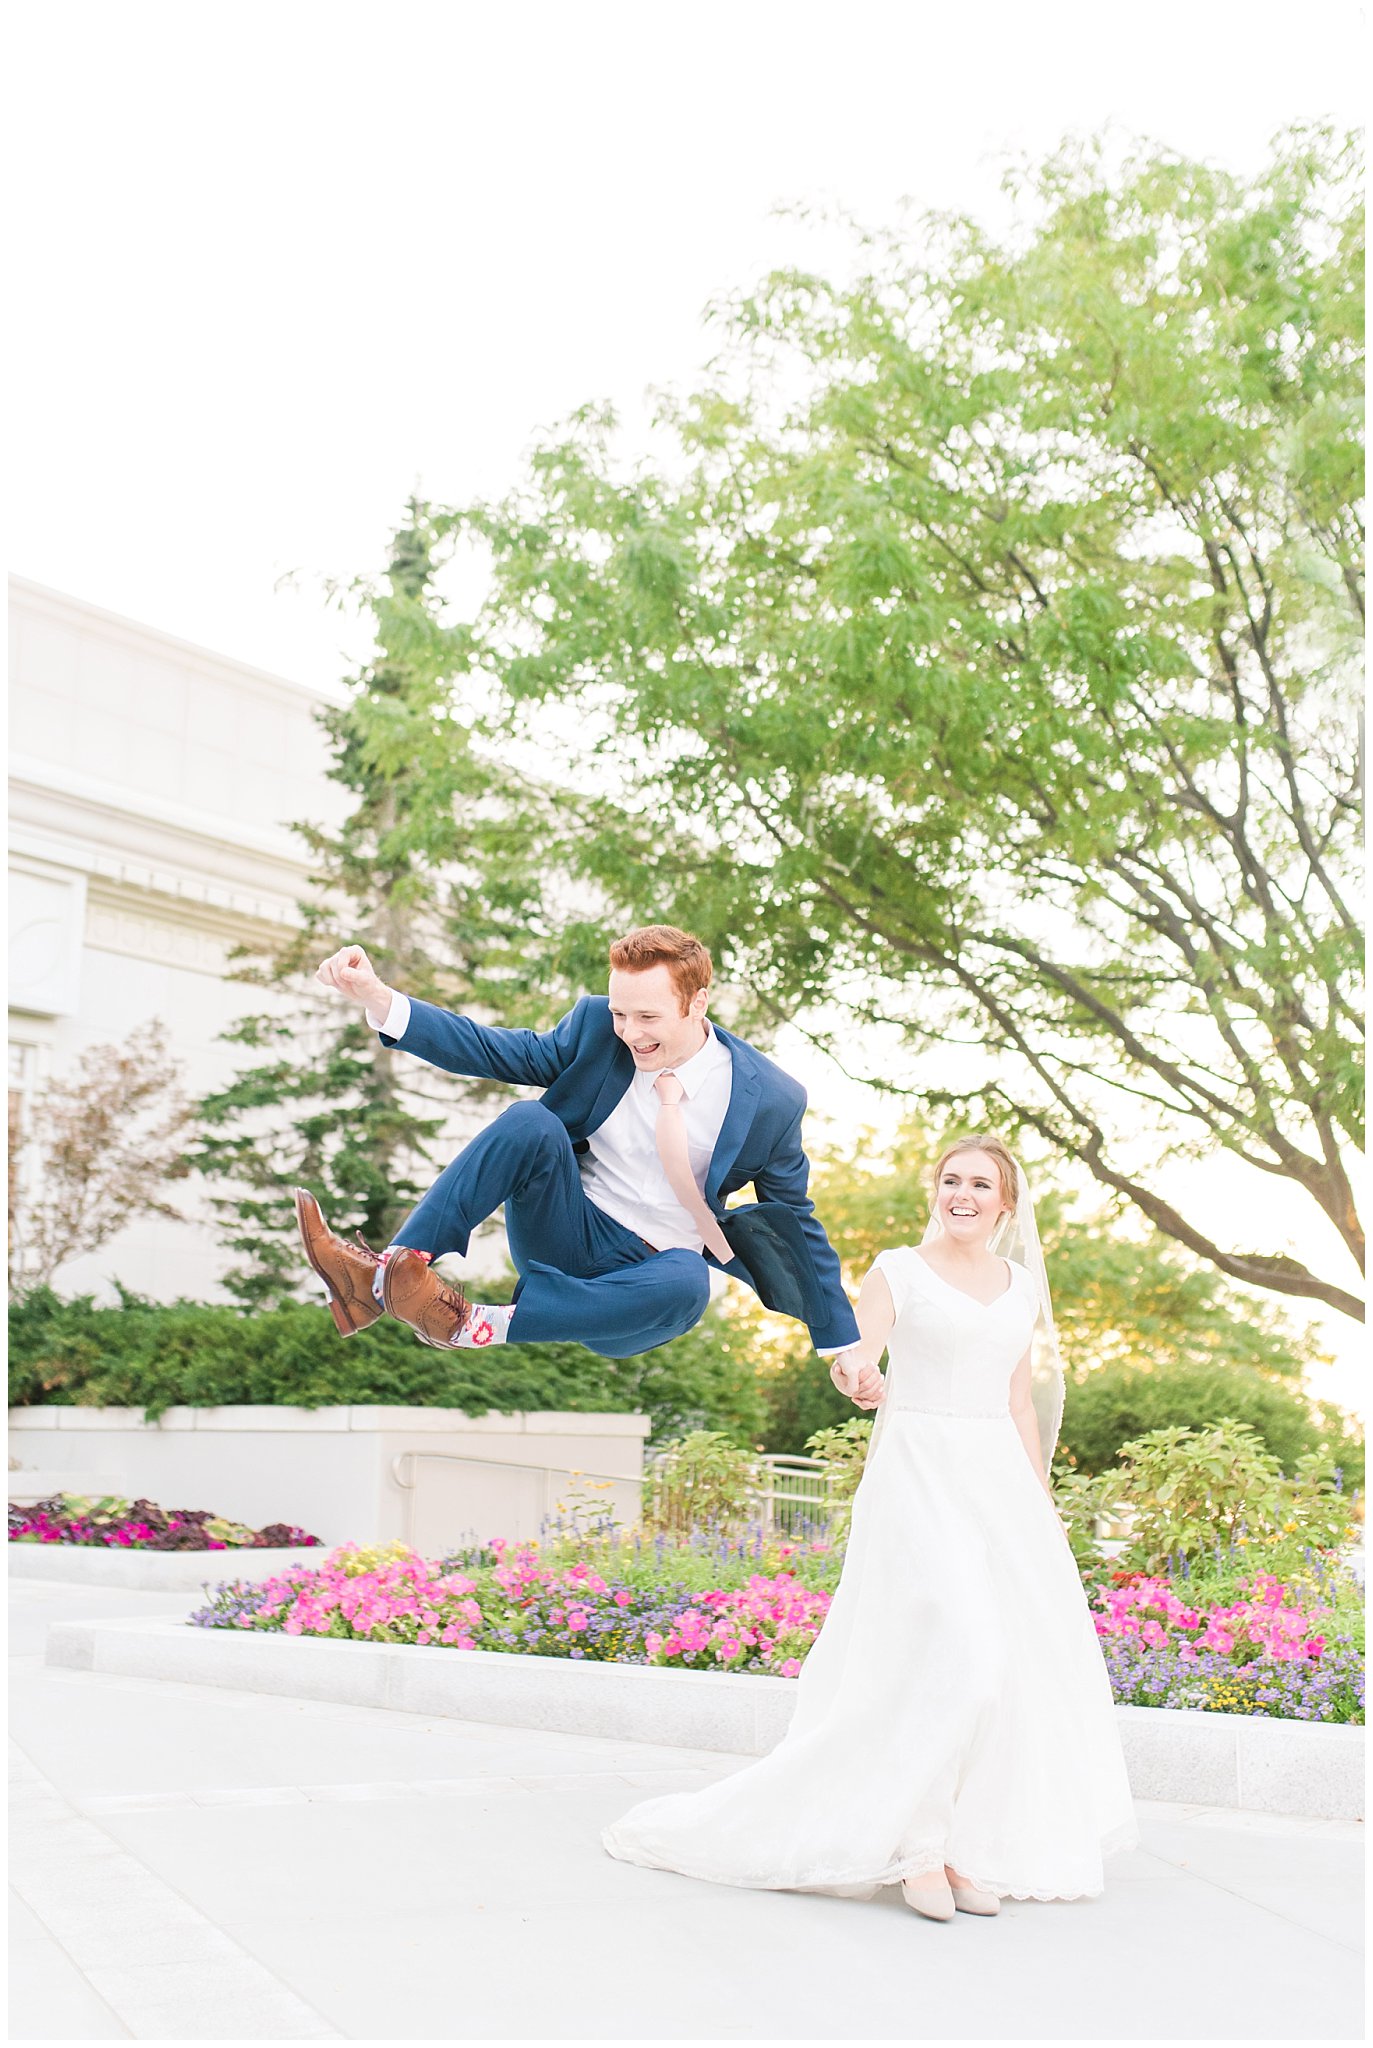 Groom heel clicks at the Bountiful Temple | Top Utah Wedding and Couples Photos 2019 | Jessie and Dallin Photography